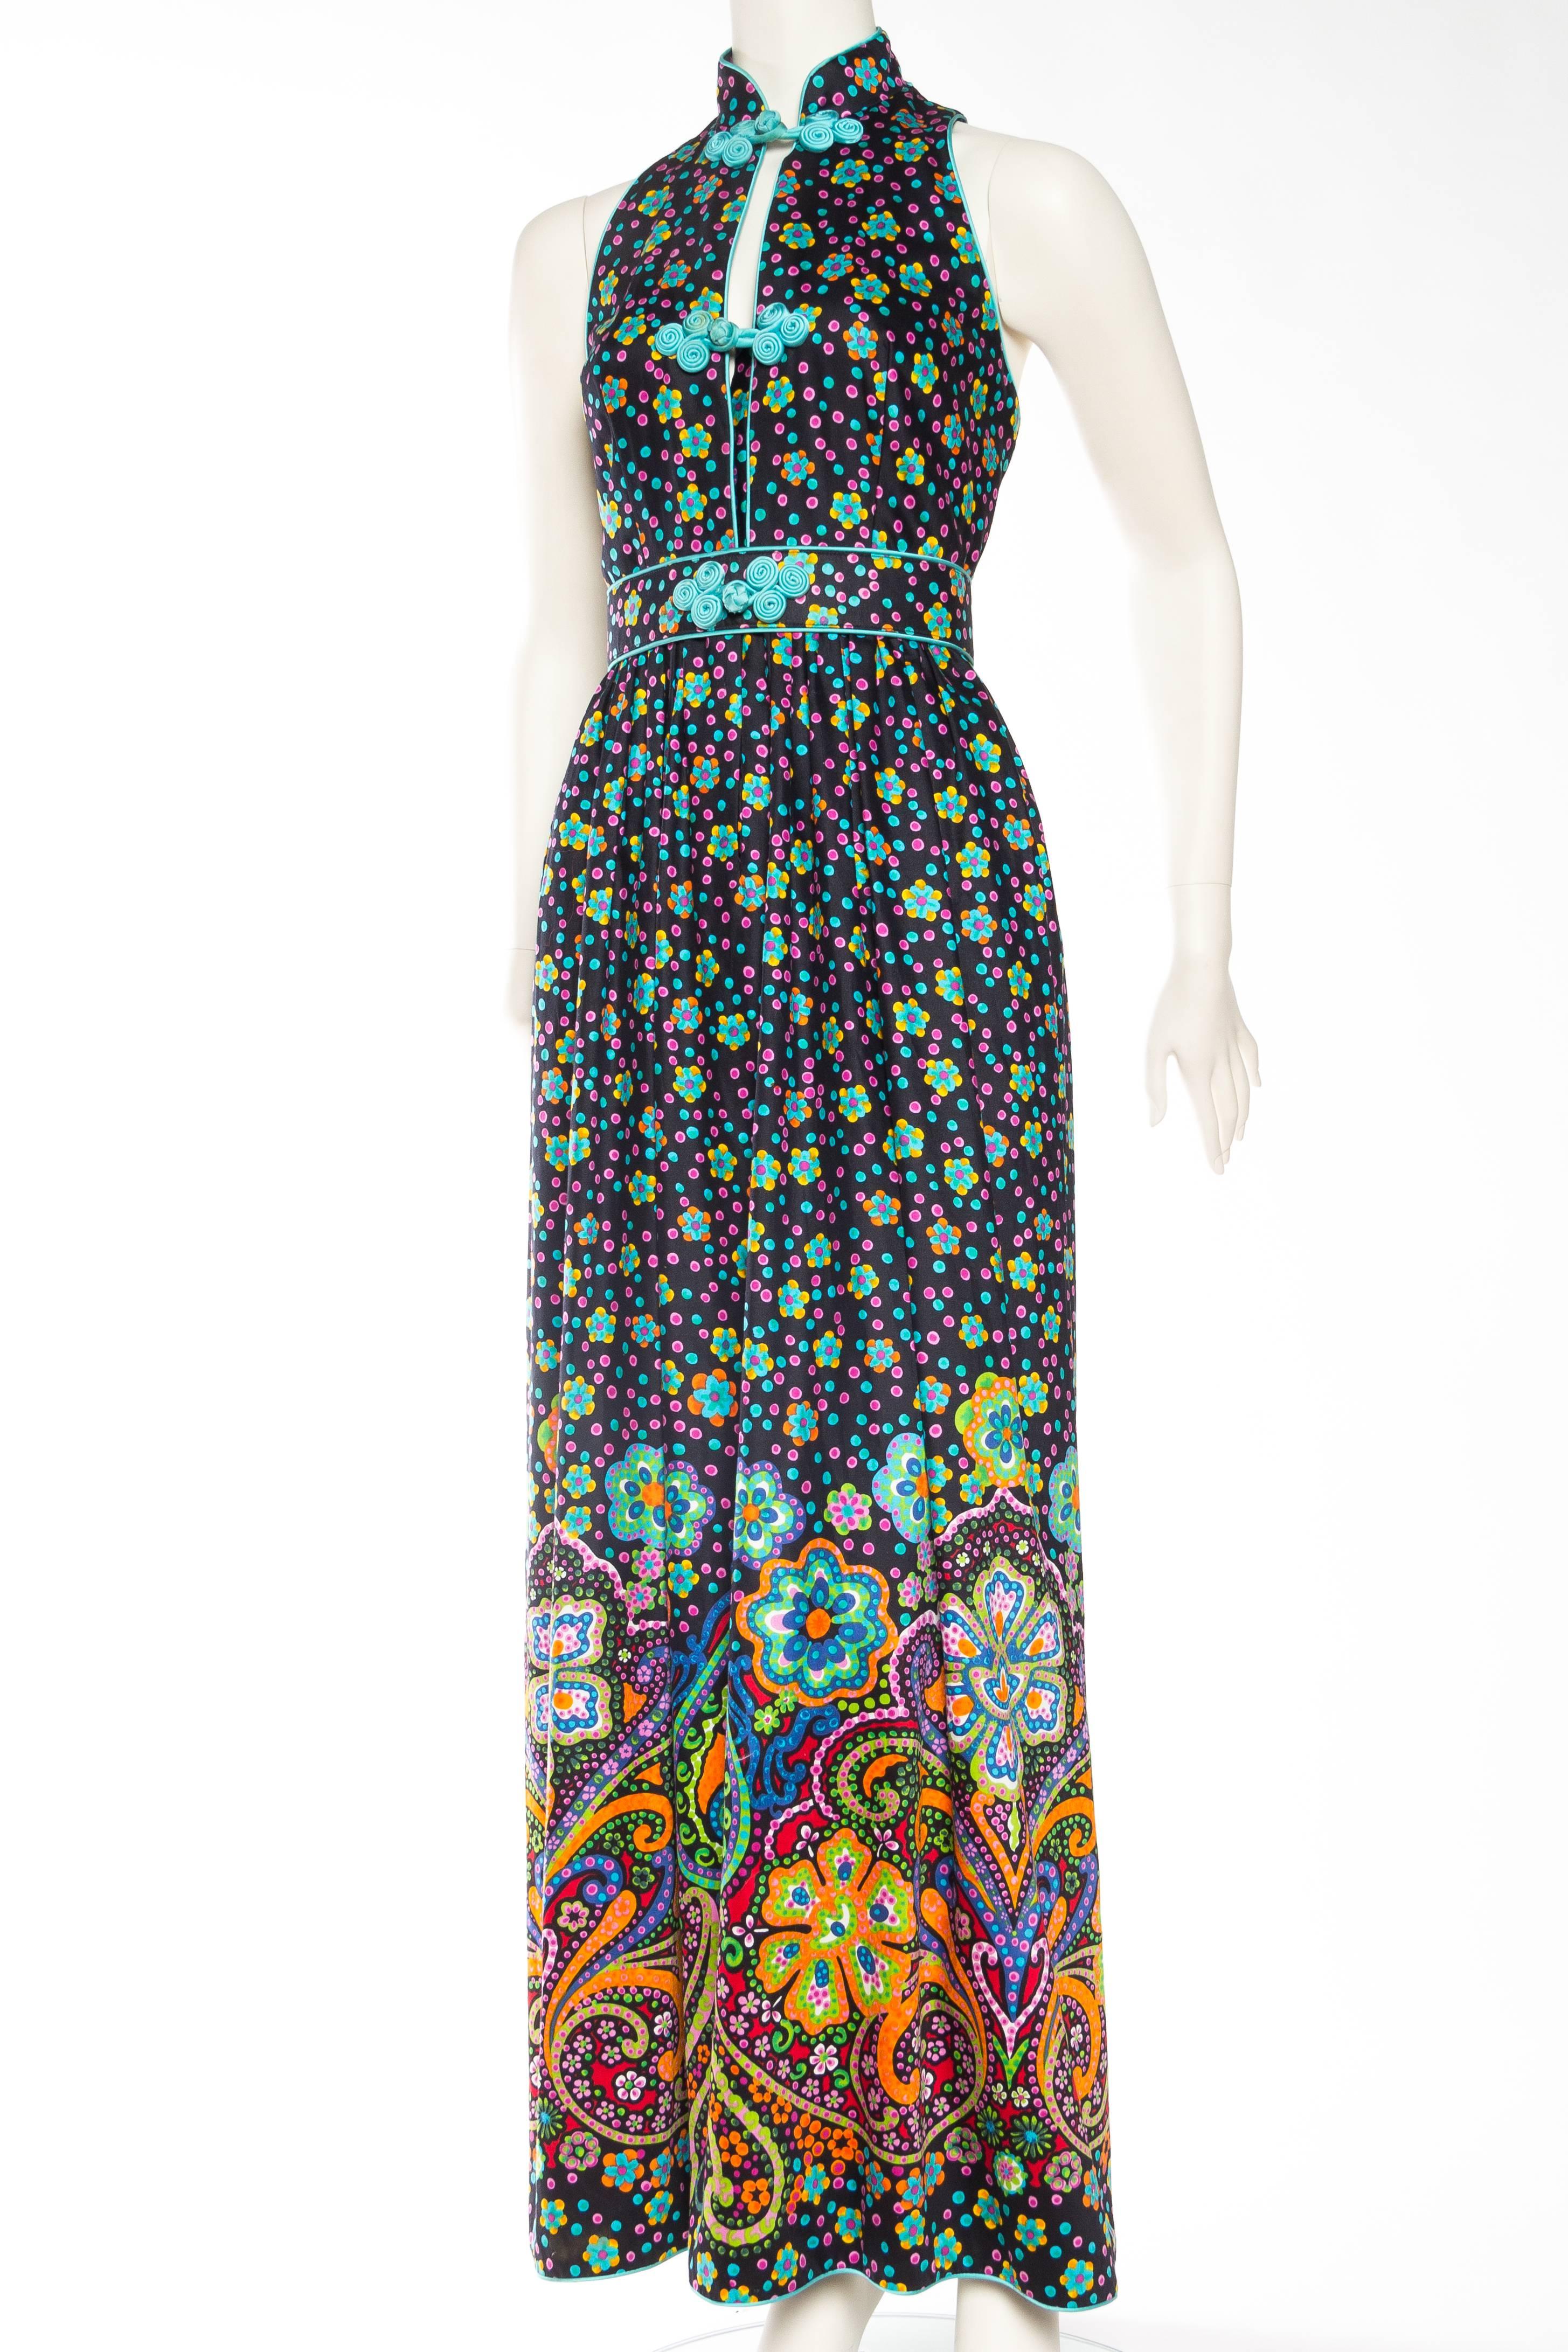 Rare Large Size 8 Early 1970s Oscar De la Renta Cotton Floral Dress Backless with Asian Details. Dress is clipped to fit mannequin but will fit a contemporary large size. 